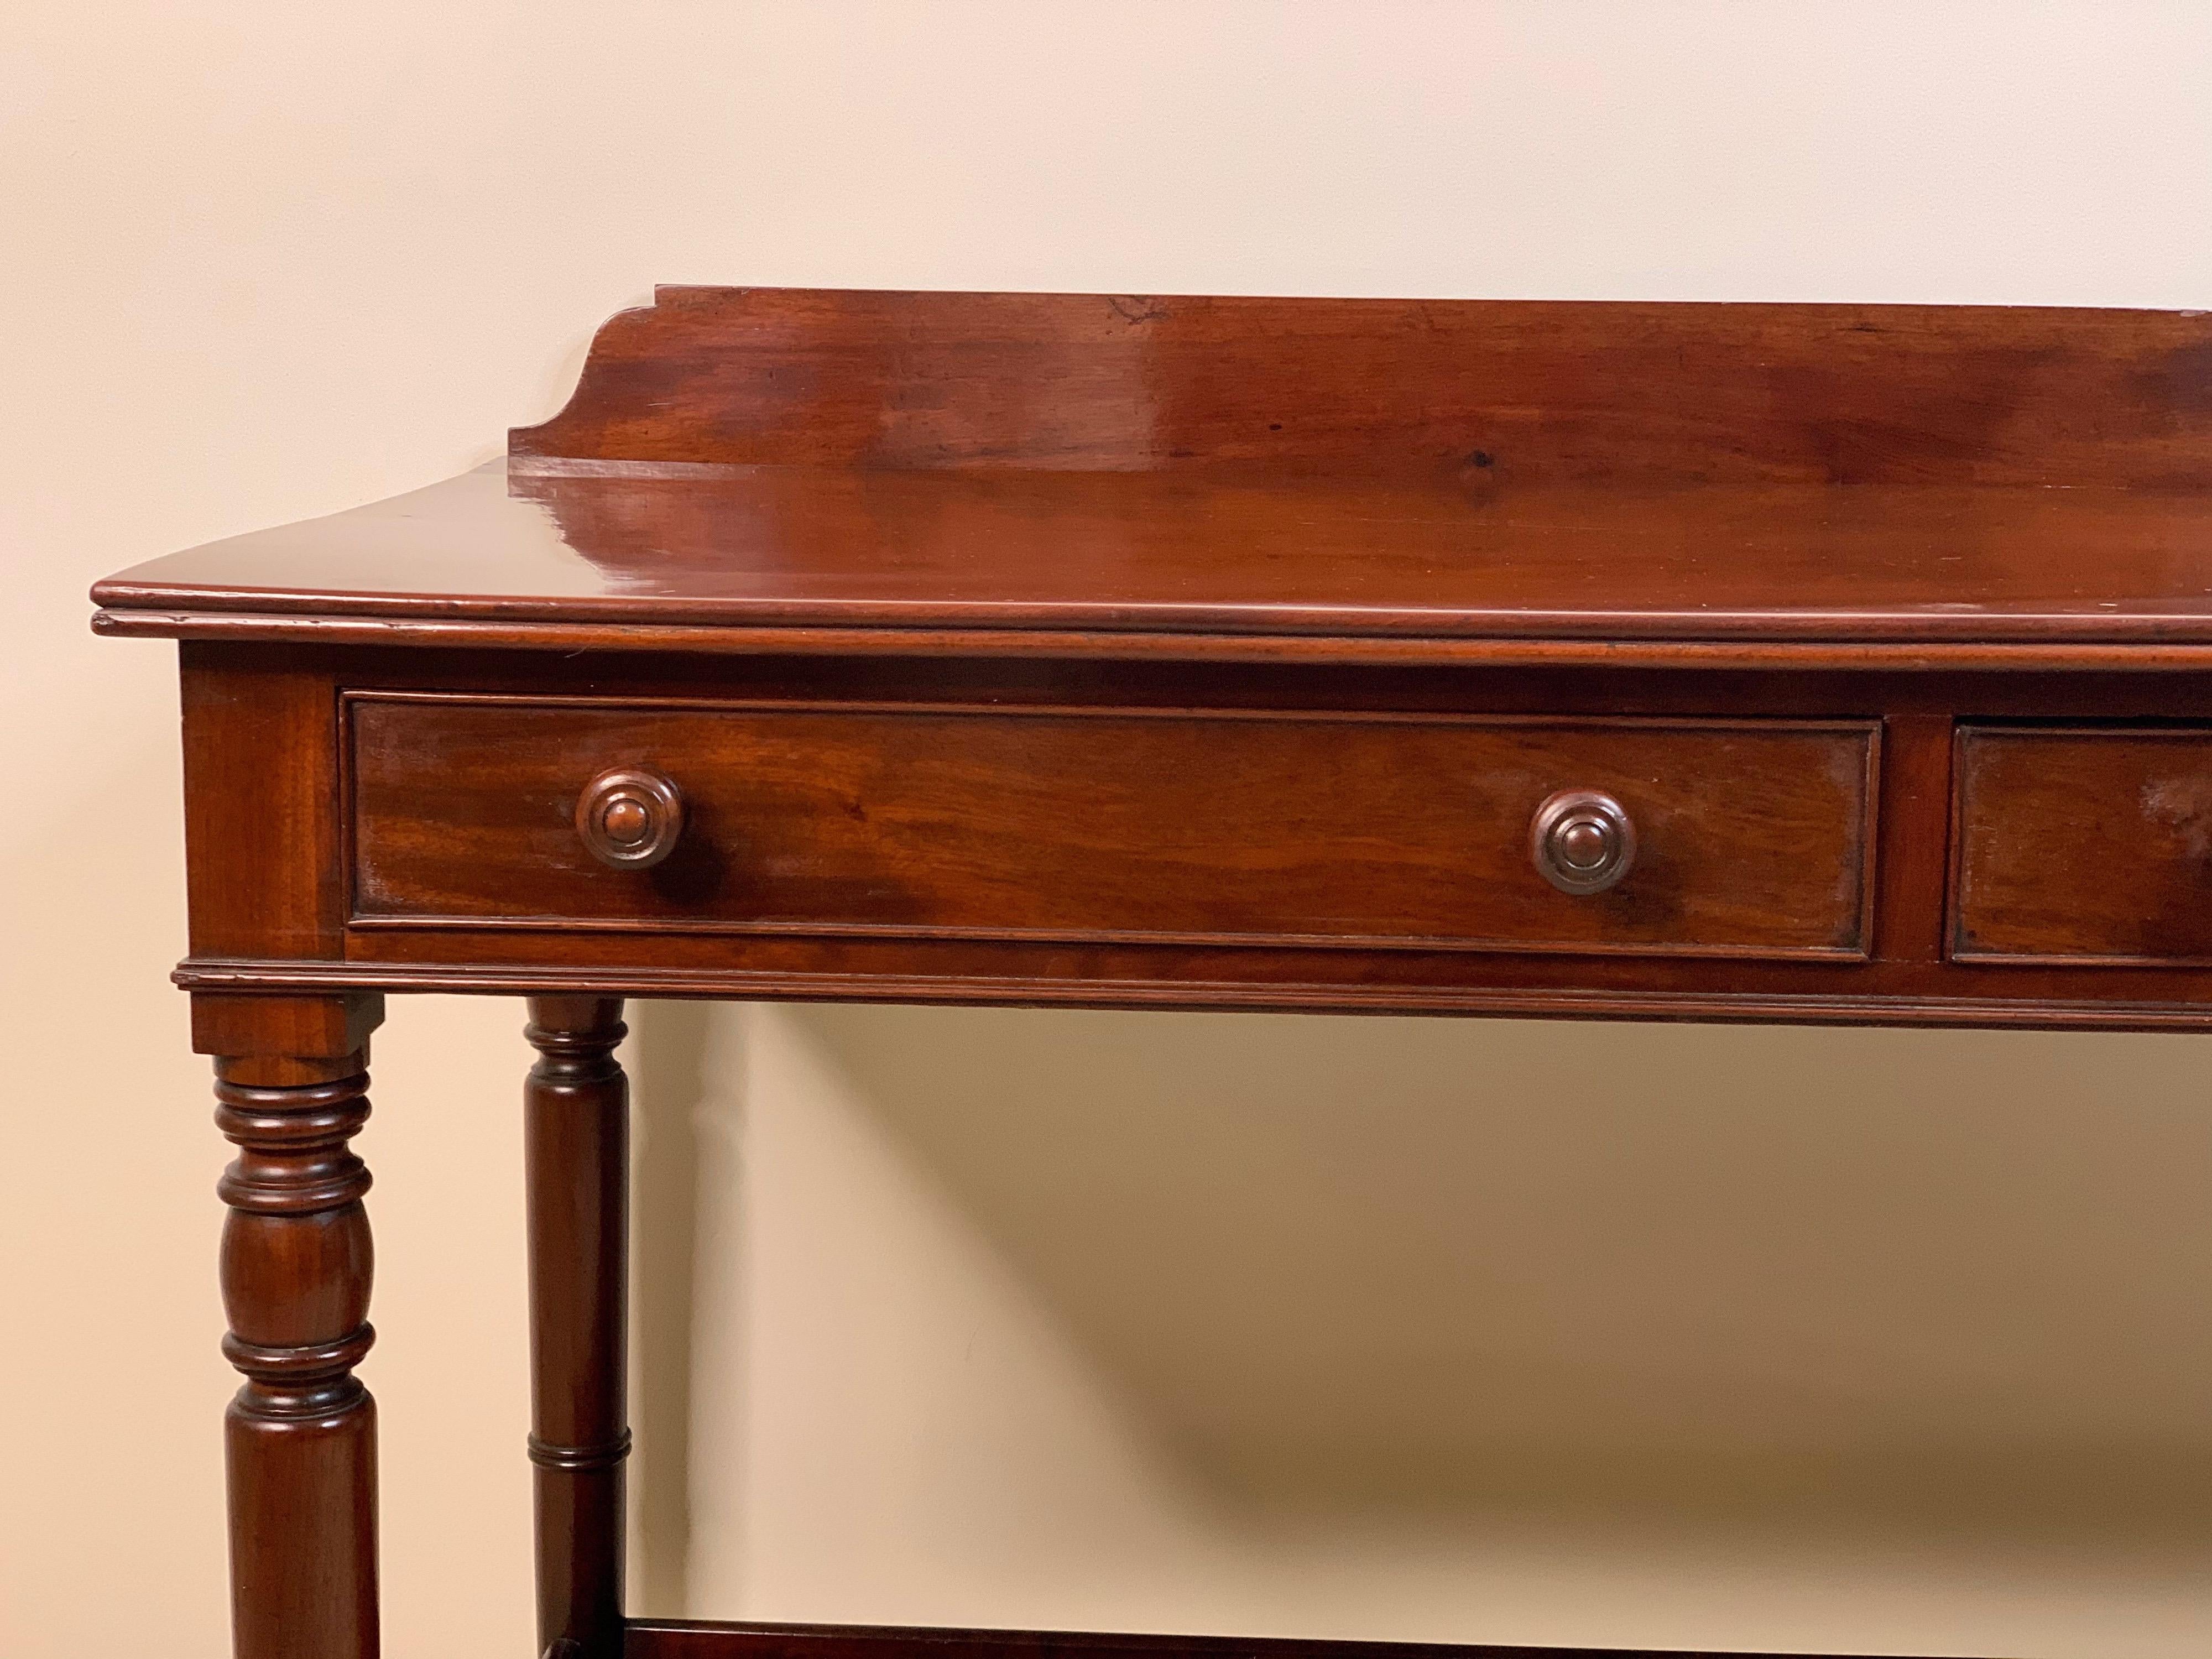 English mahogany two-drawer server or dressing table, can be used as a server or as a vanity/dressing table made of beautiful english mahogany wood, circa 1890-1900
Dimensions: 26.75